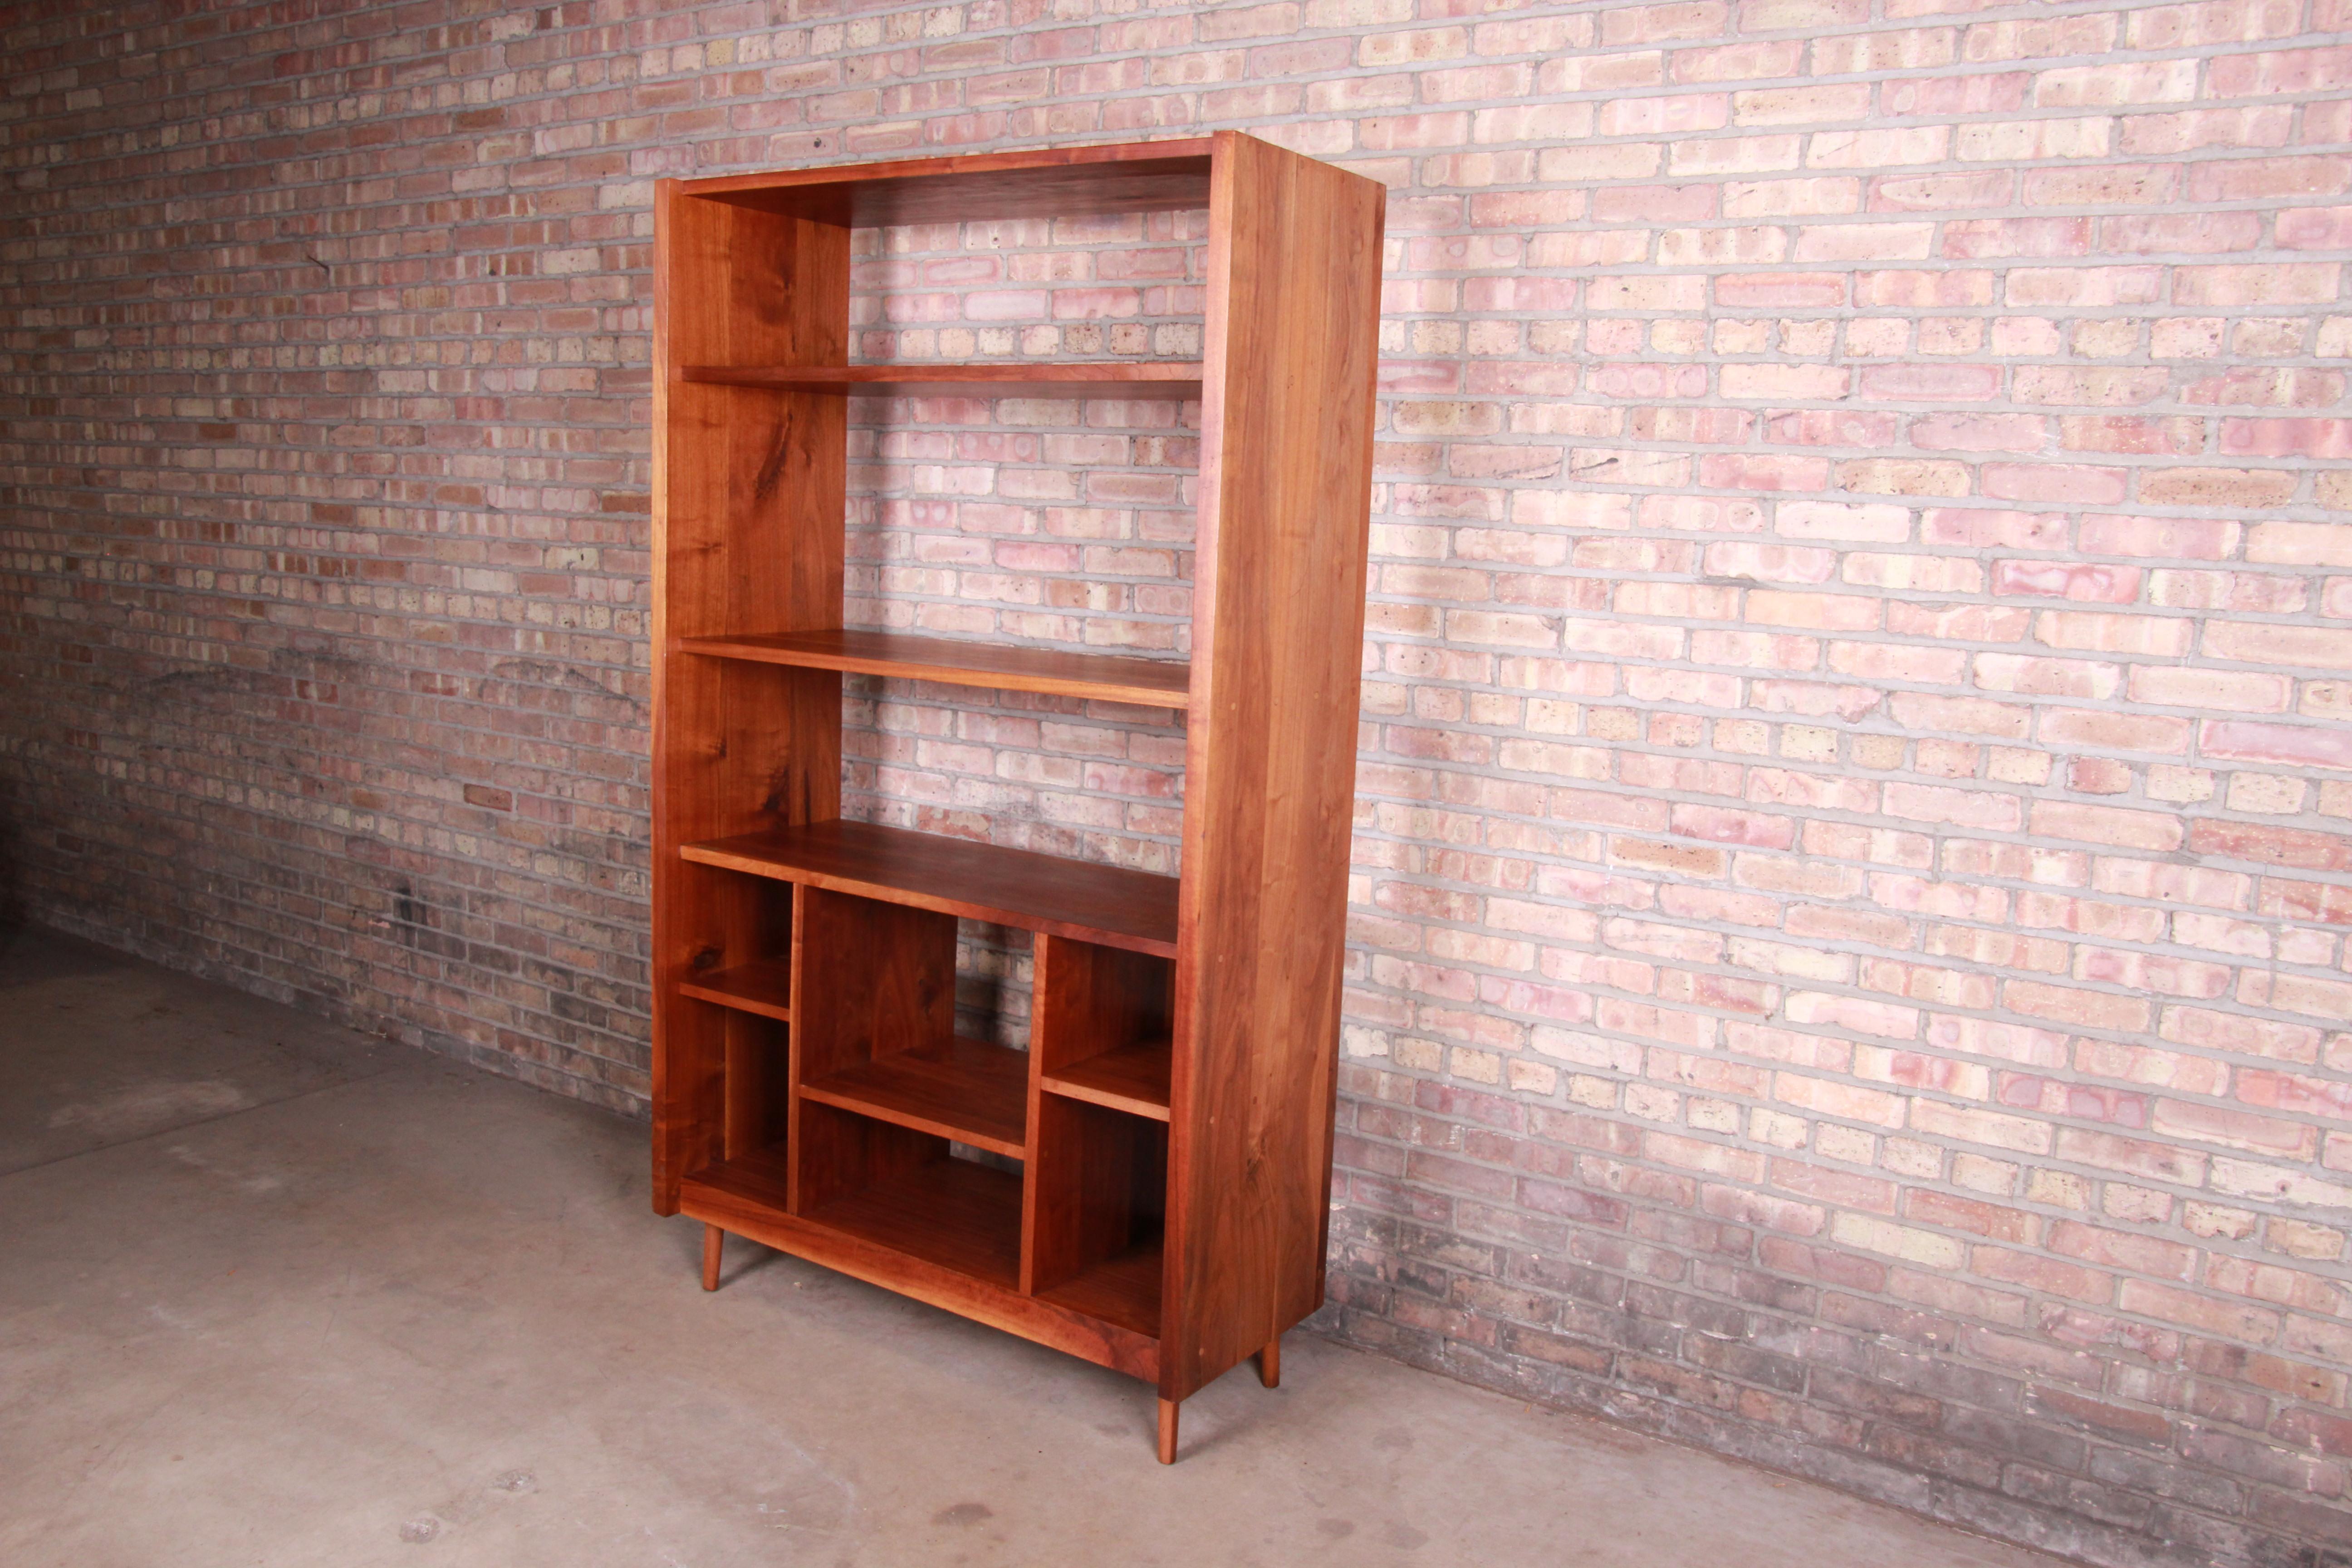 A one-of-a-kind custom studio crafted handmade solid walnut bookcase, étagère, or room divider

By Robert William Lifton

USA, circa 1960s

Measures: 47.25